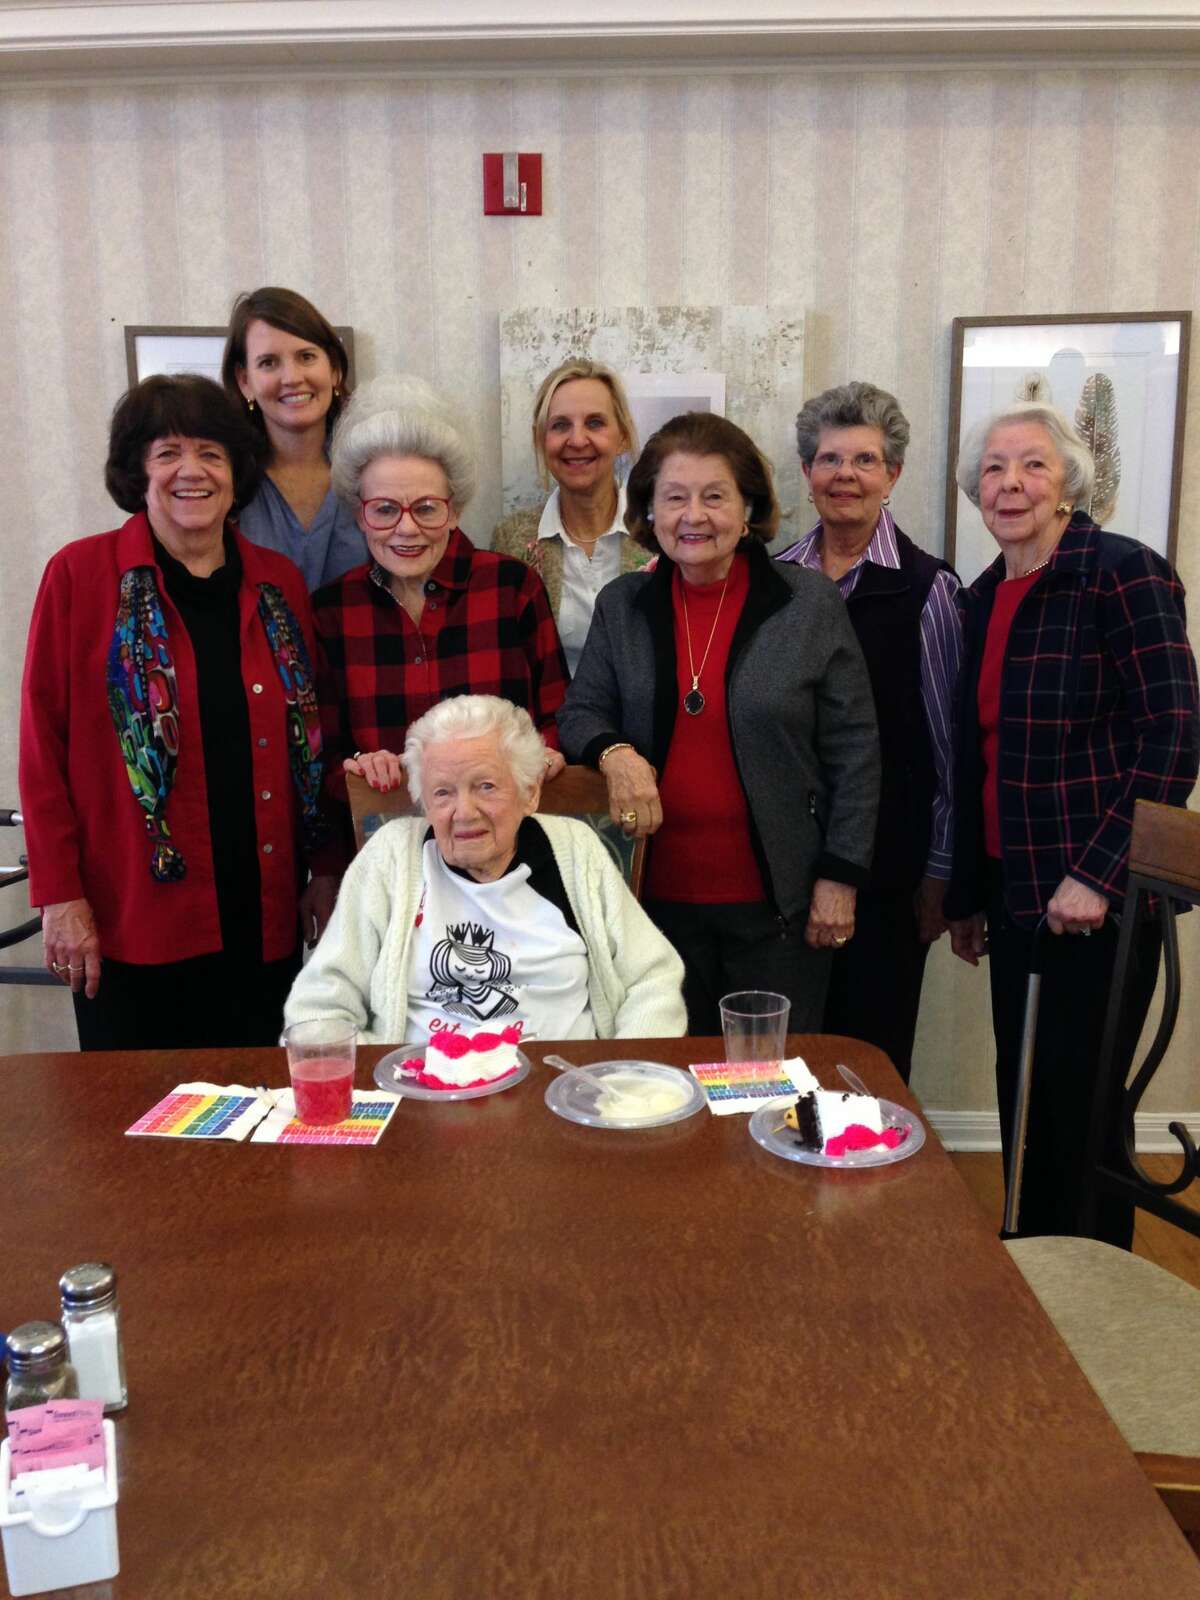 Wilson party: D’Ann Norwood, back row from left, Debbie Burke, Julie Cole and Diane Brown; Vicky Shaw, middle row from left, Gayle Dodson and Dottie Baker; and Alice Wilson, front row